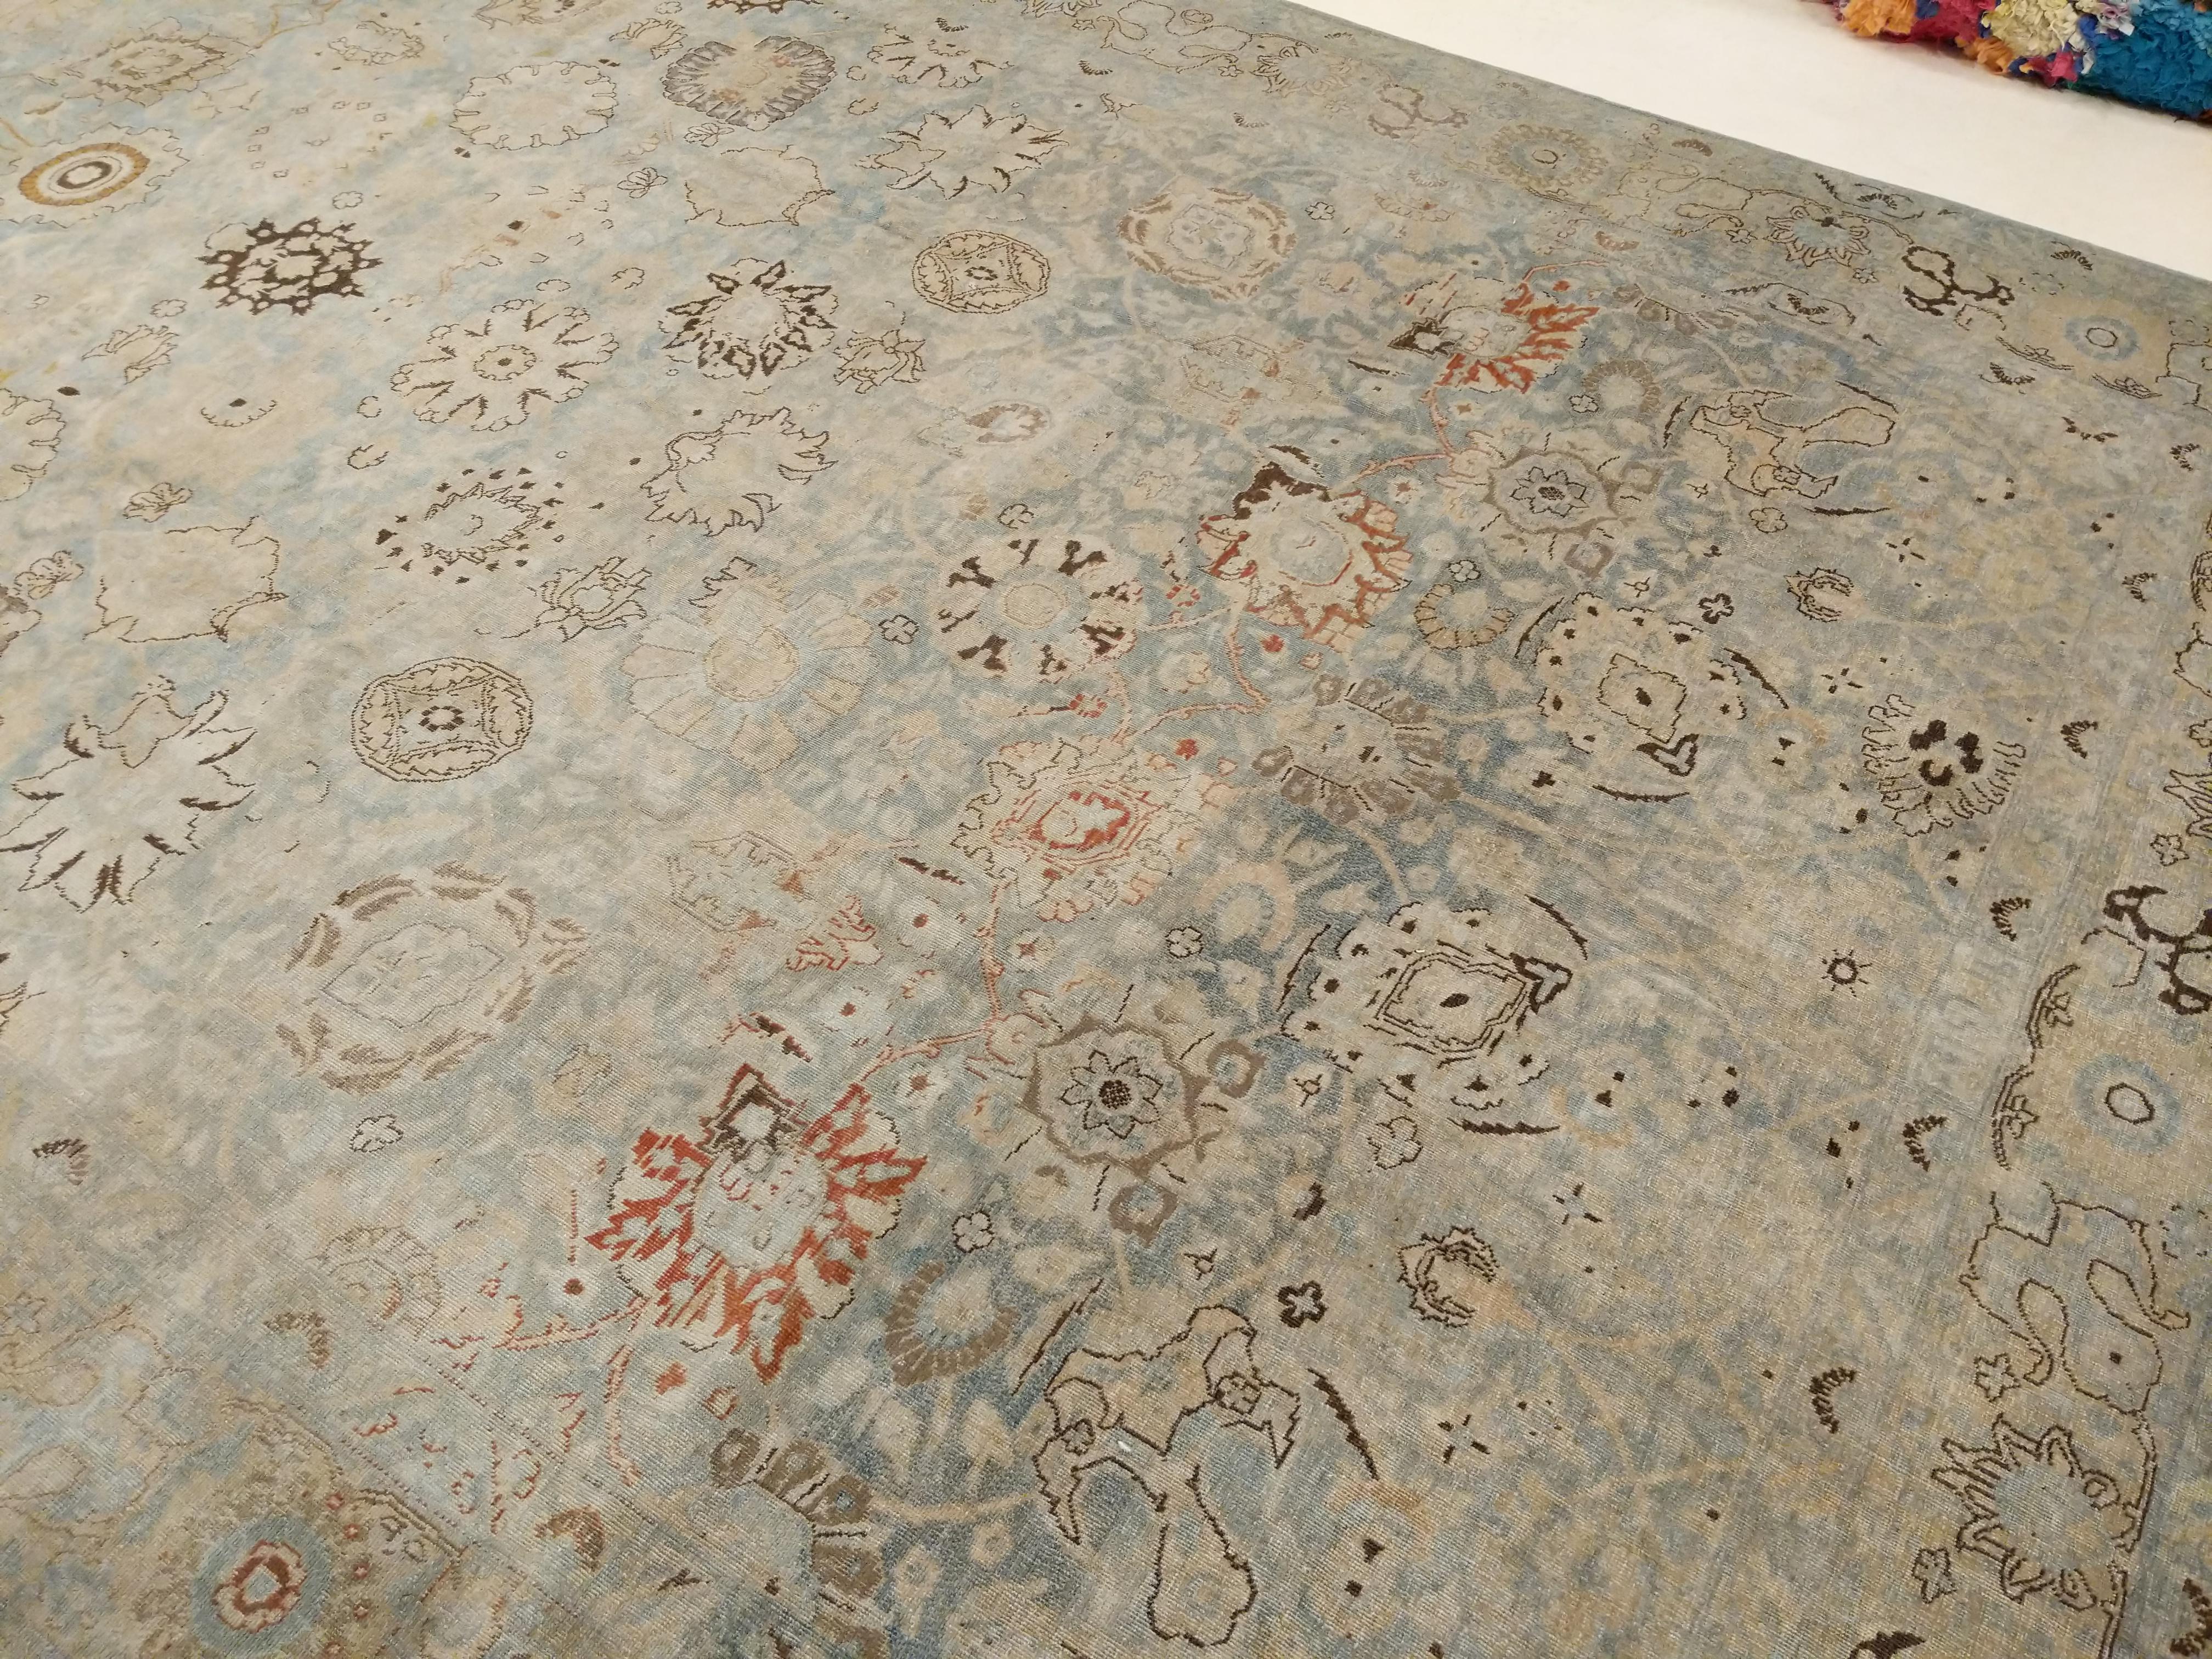 Hand-Knotted Large Fine Vintage Turkish Soft Teal Shabby Chic All-Over Design Rug